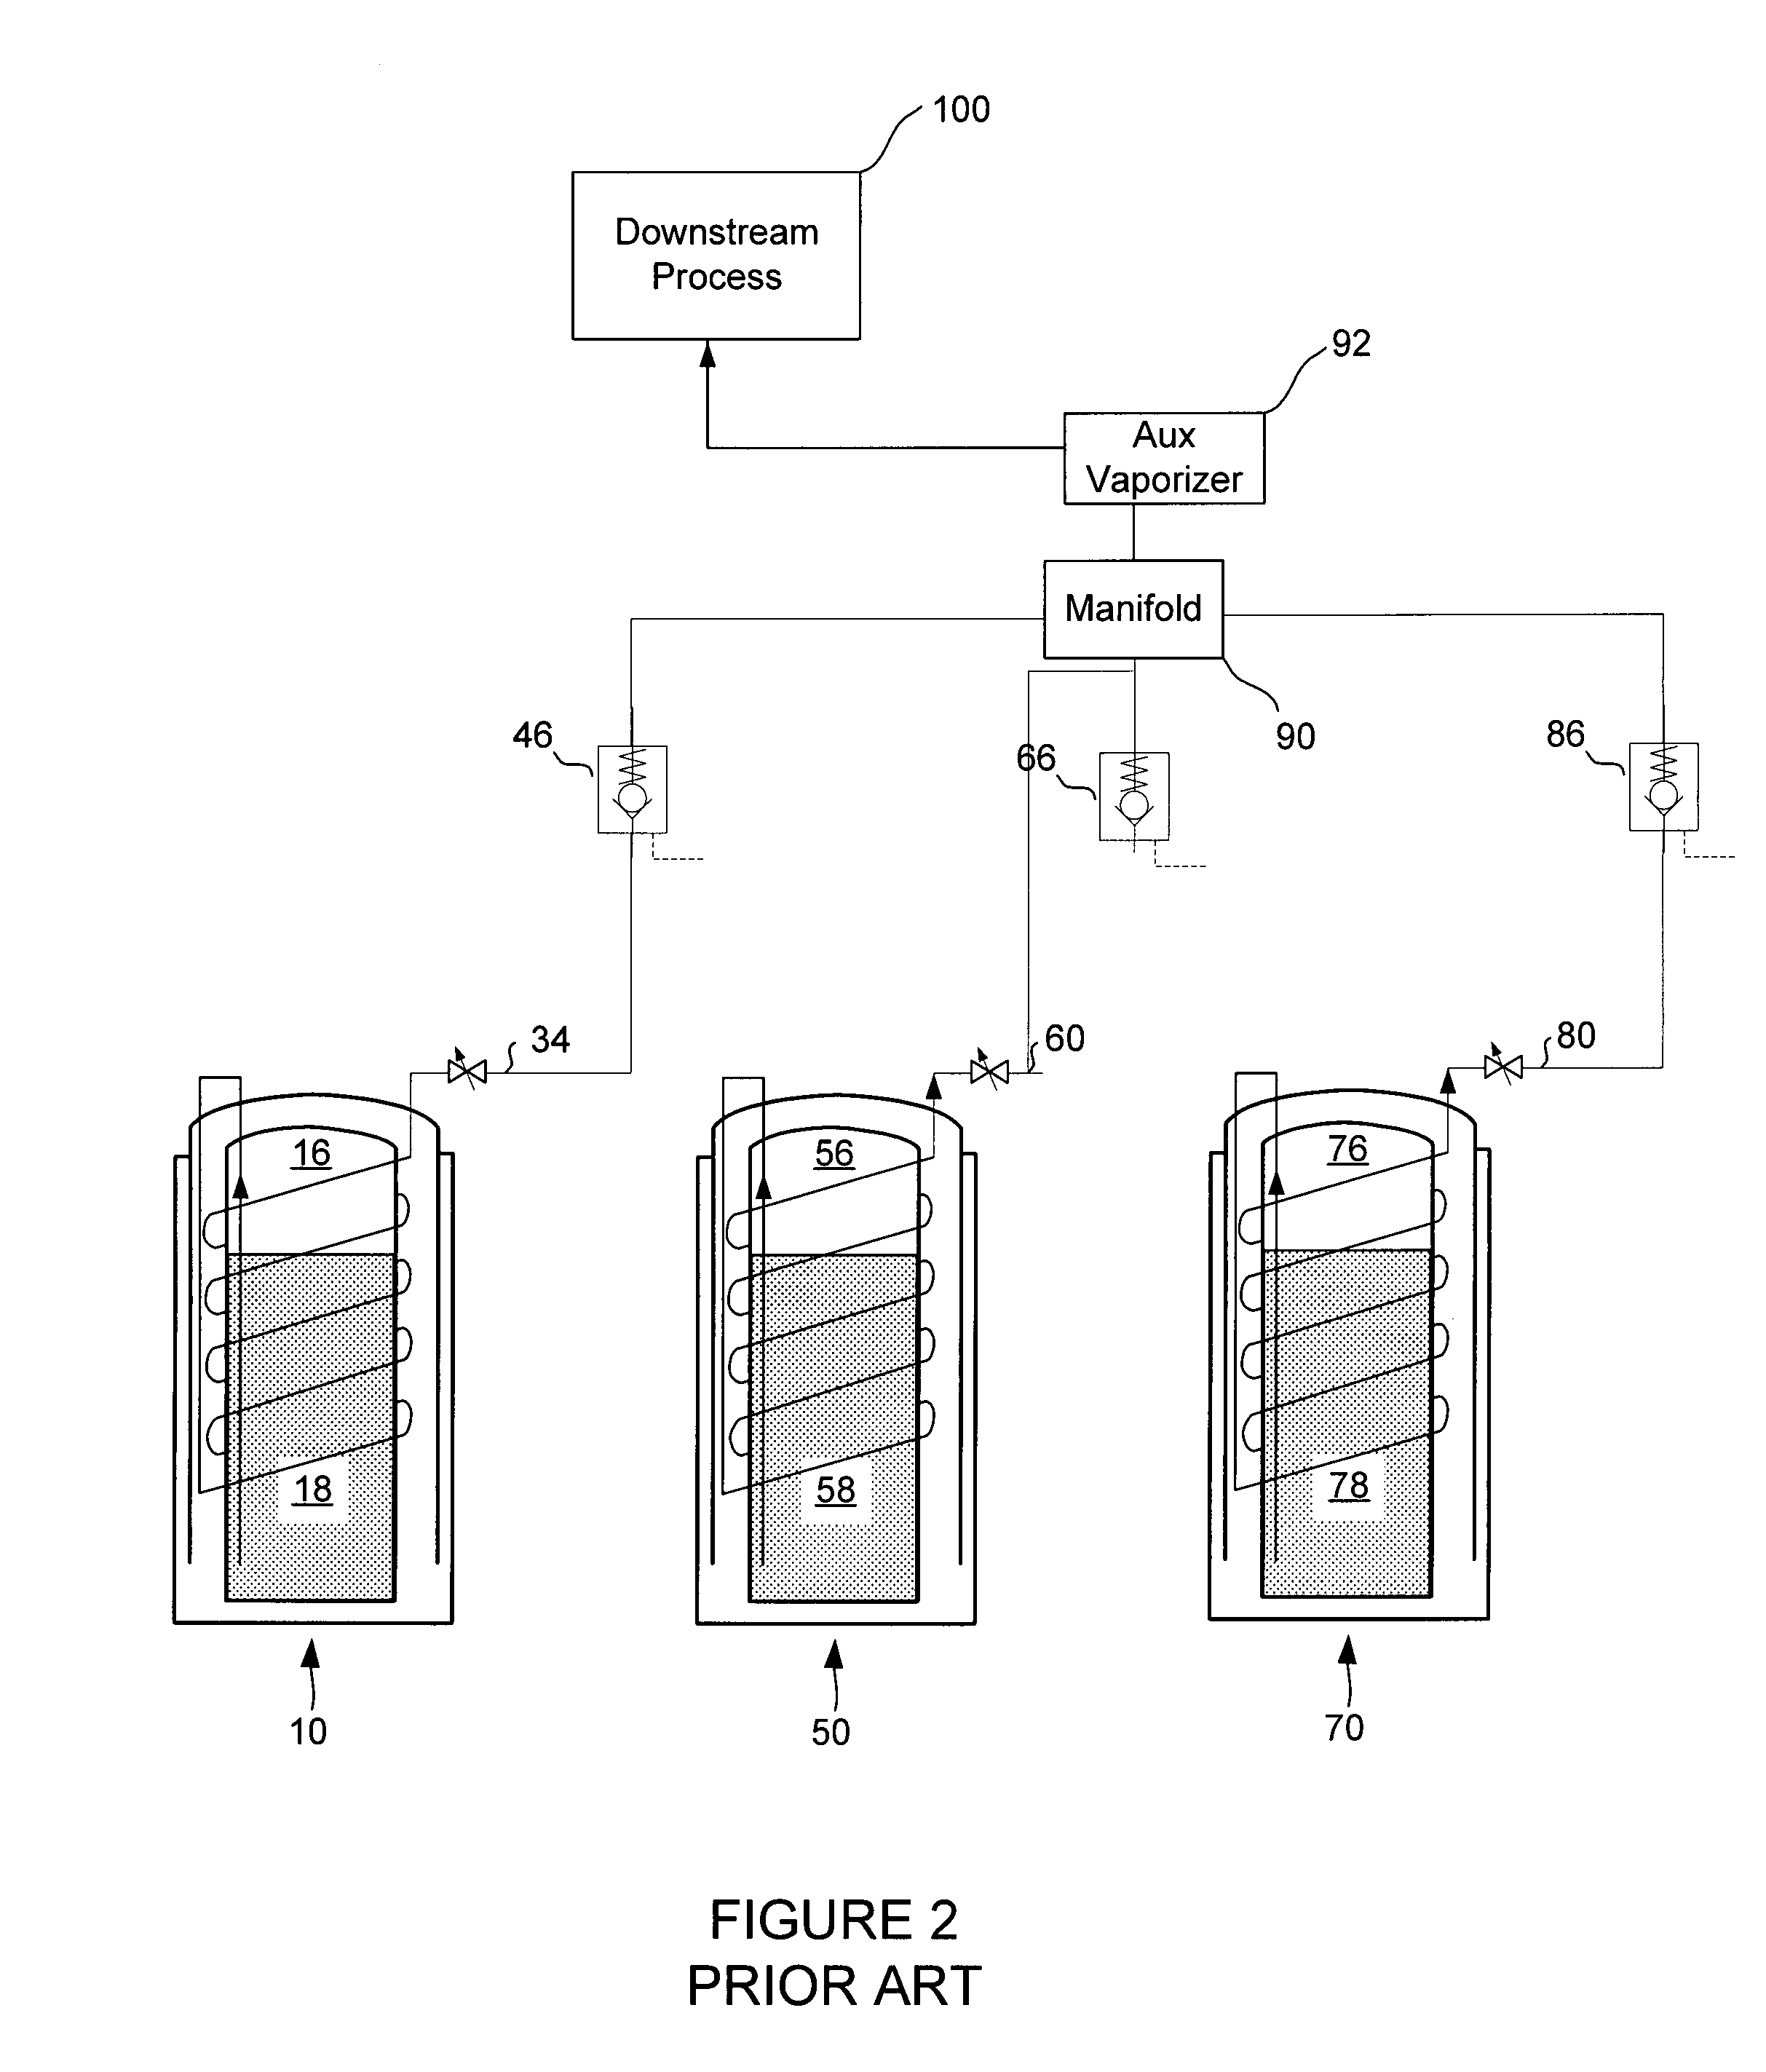 High purity carbon dioxide delivery system using dewars